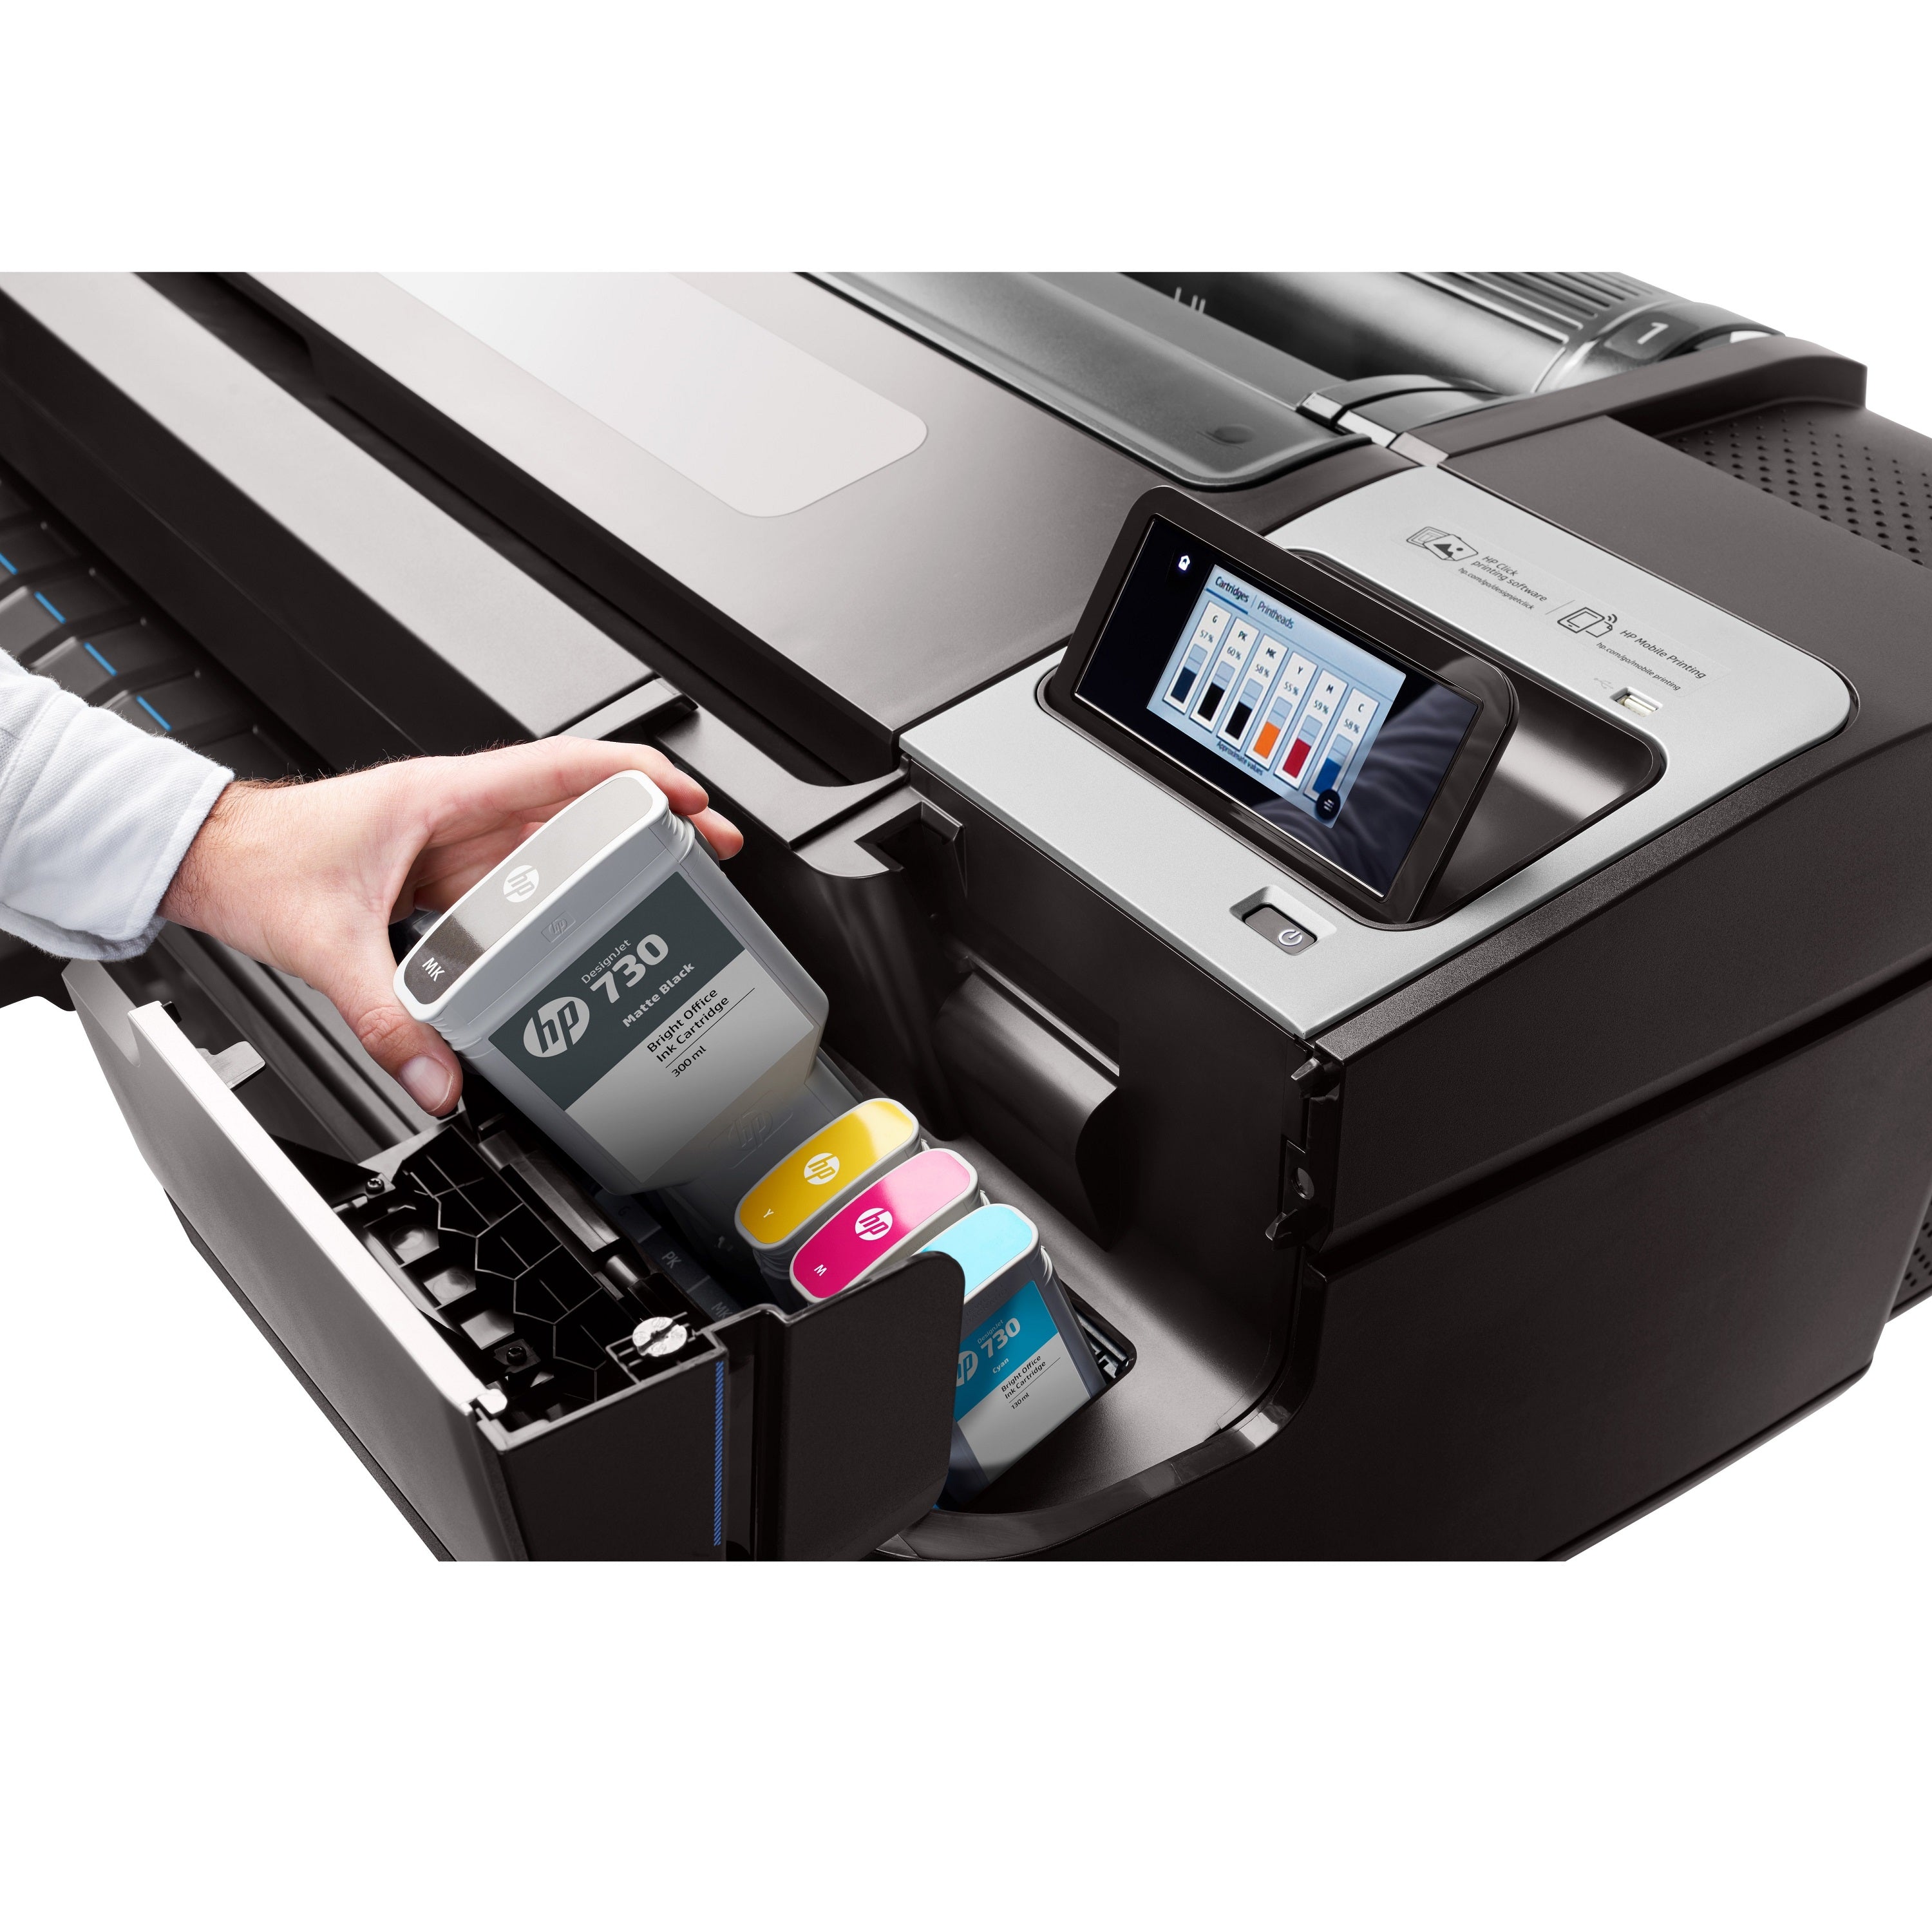 HP DesignJet T1700dr: A Reliable Wide-Format Printer for Professionals